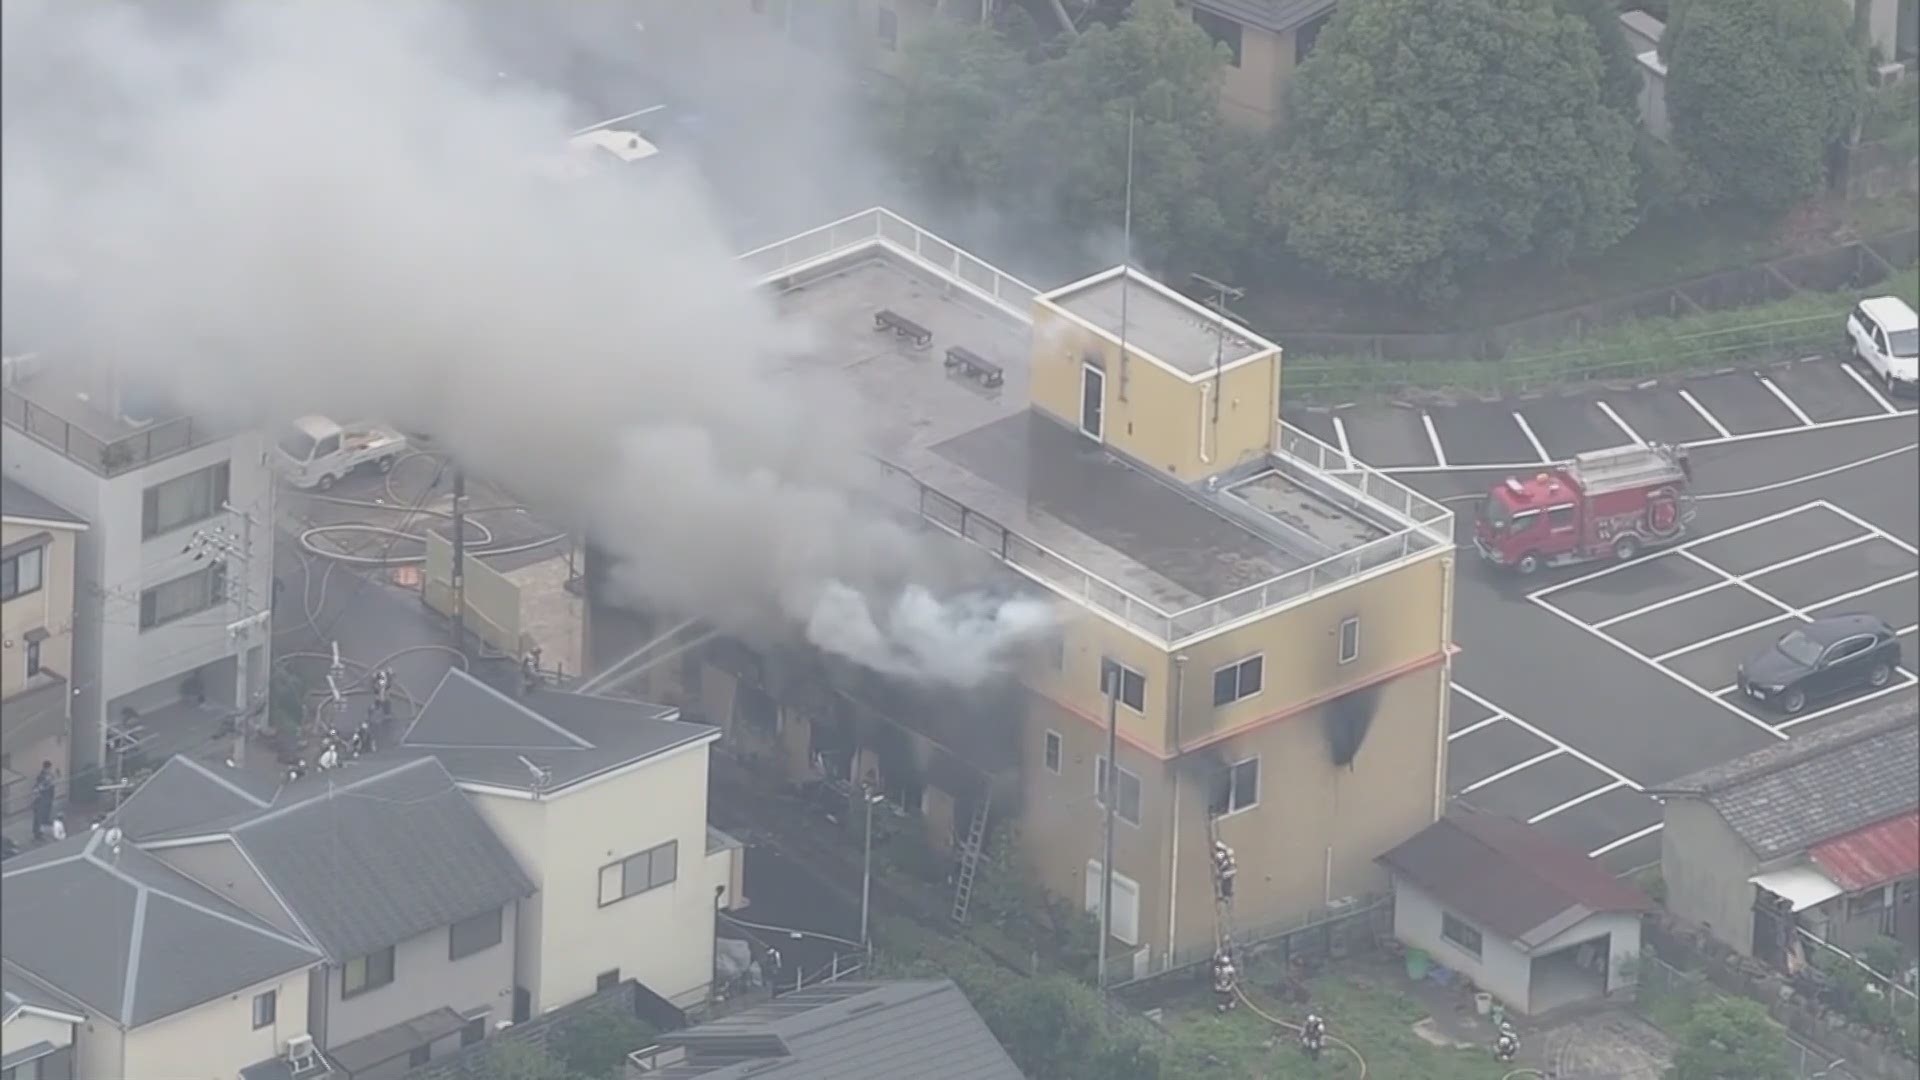 Japanese officials says at least 23 people are dead or presumed dead after a suspected arson attack at a famous animation studio in Kyoto. (AP)